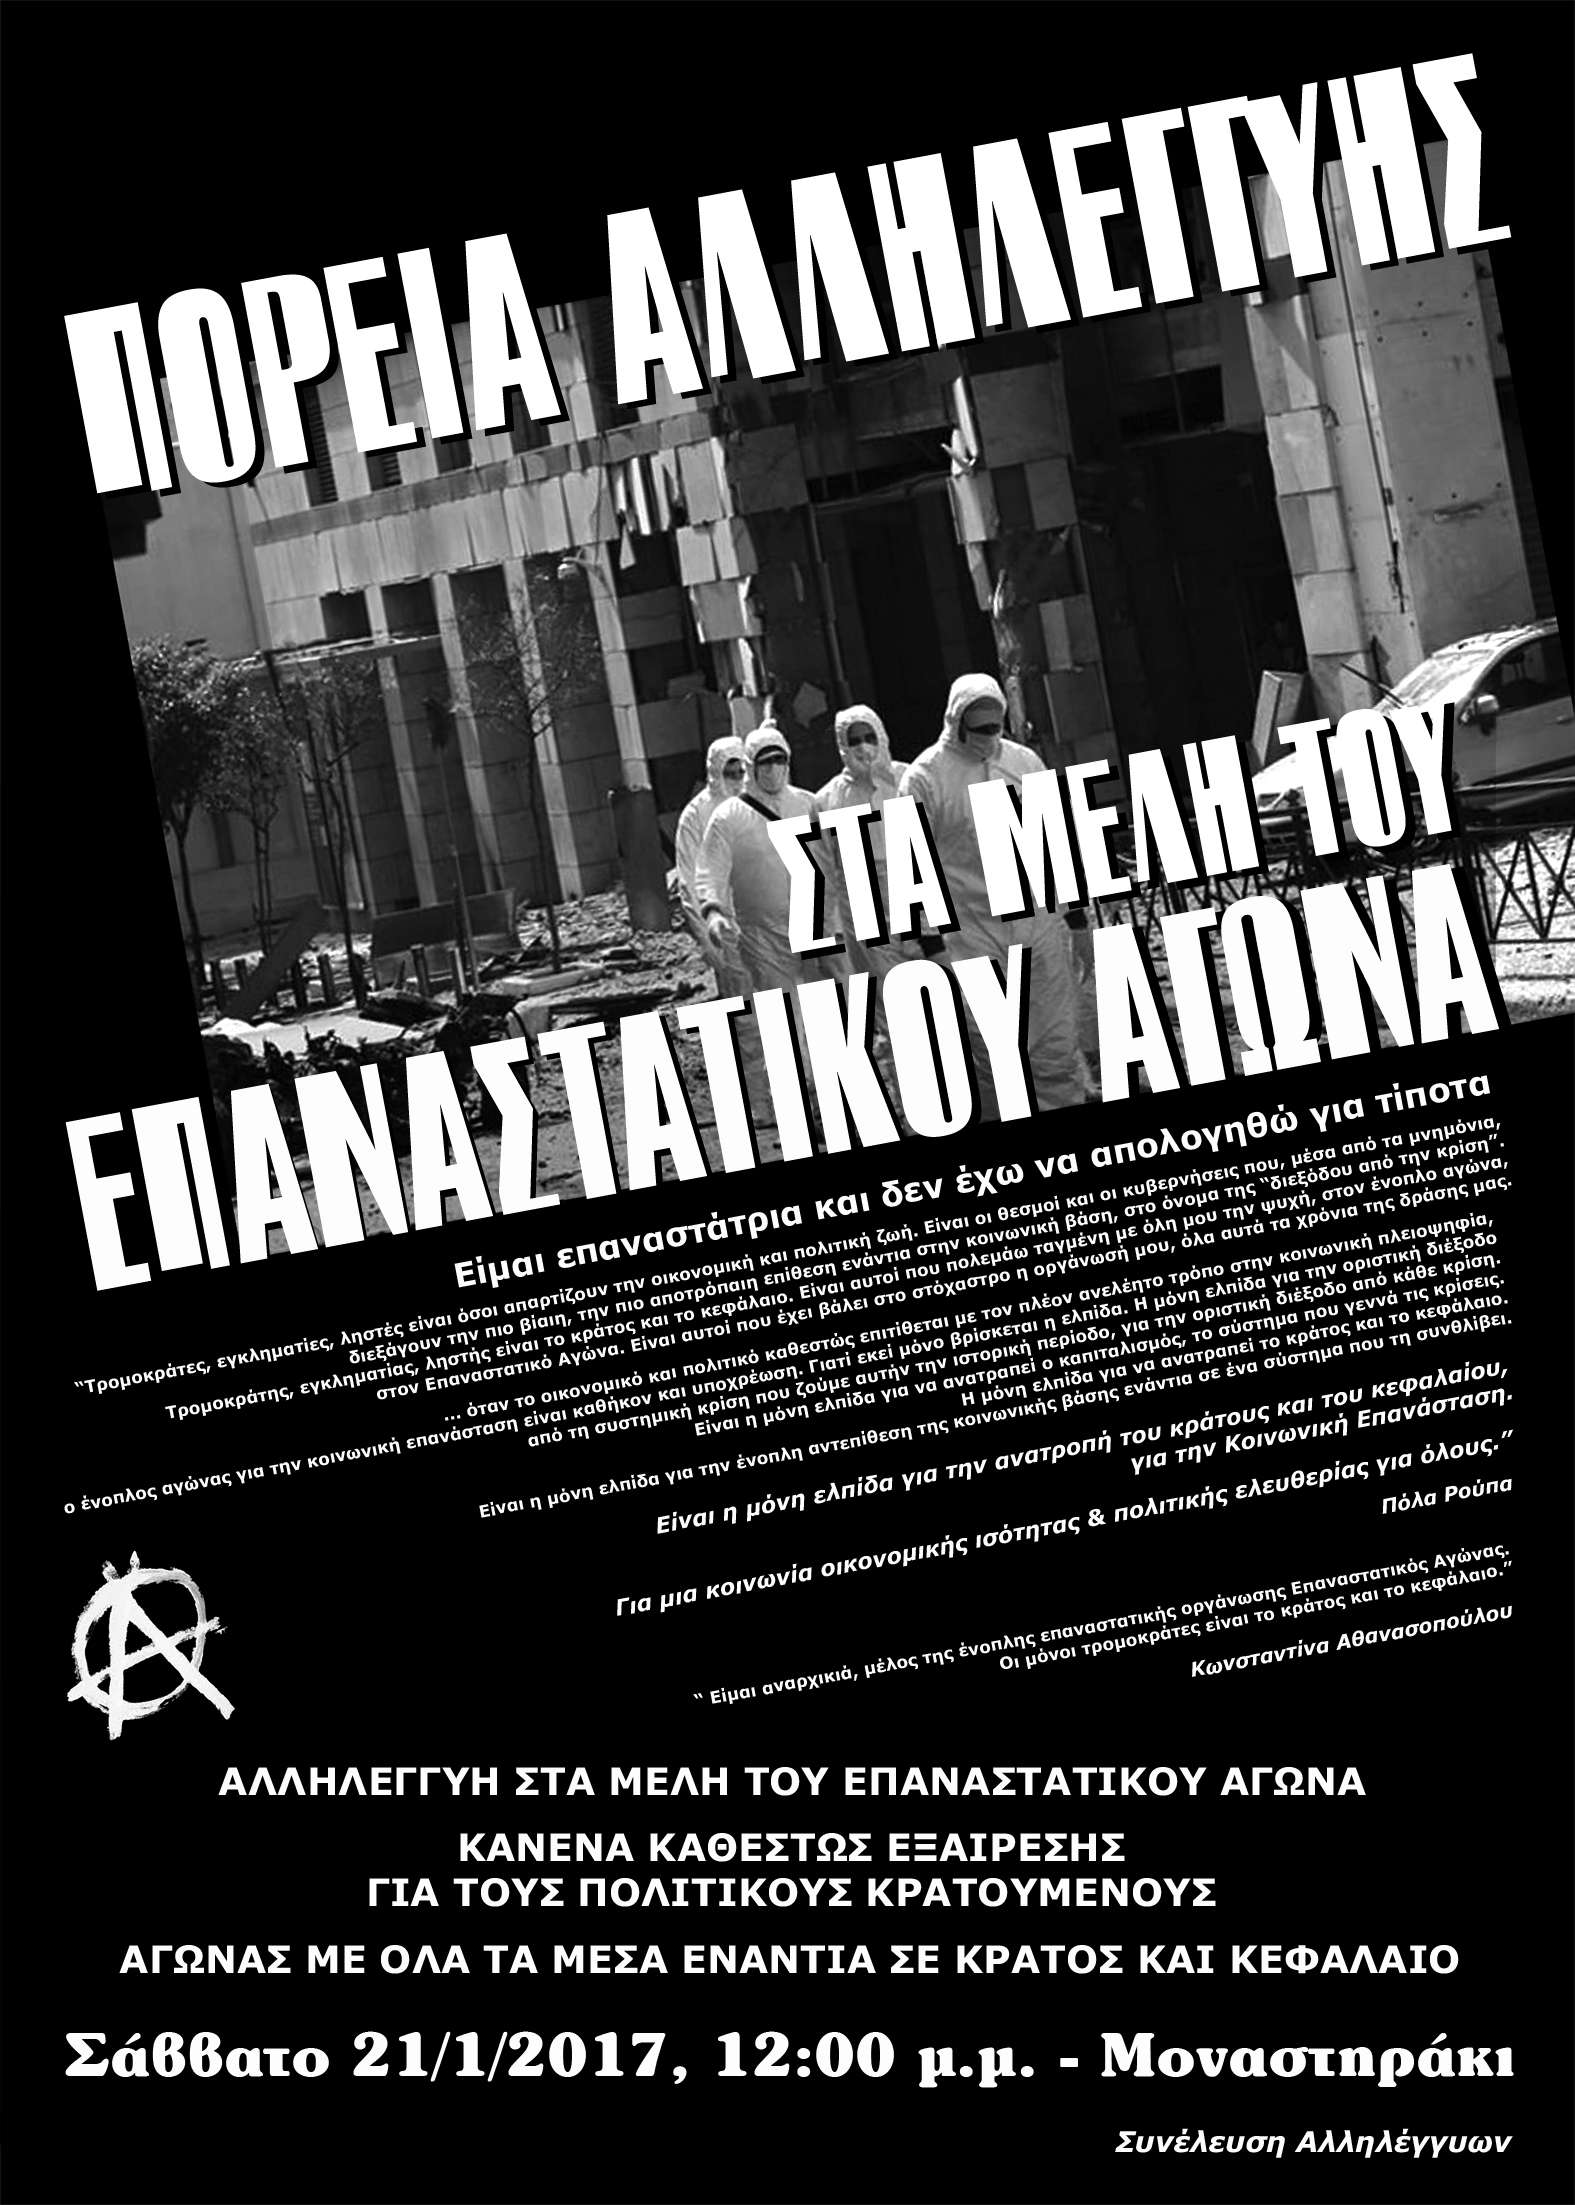 Greece: January 21st 2017 – Action Day in solidarity with Revolutionary Struggle